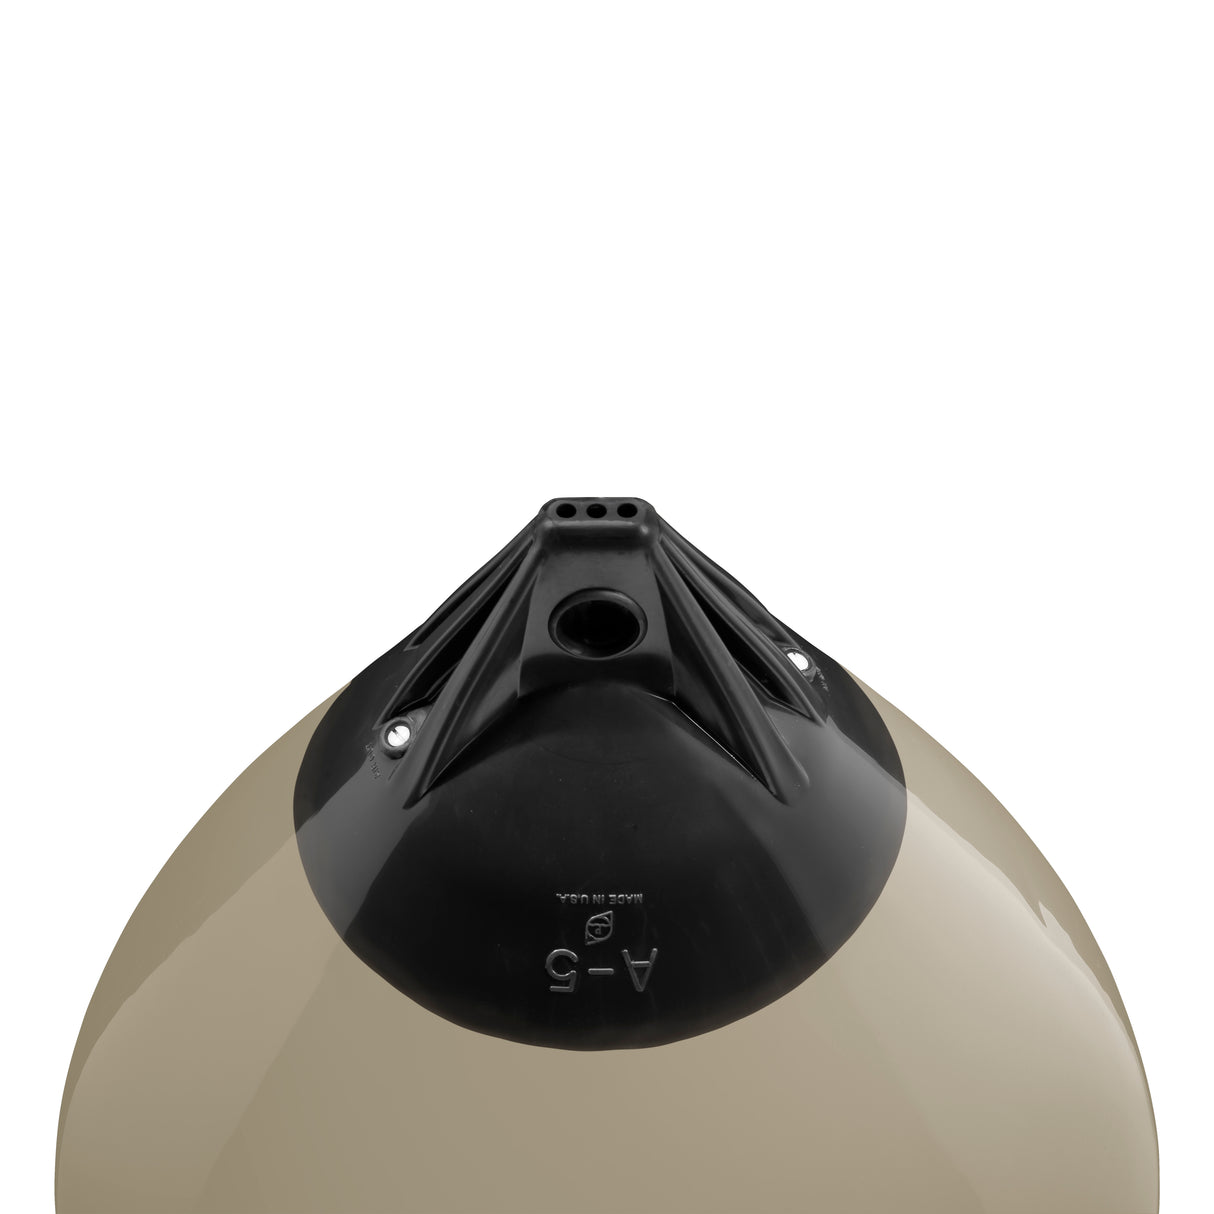 Sand buoy with Black-Top, Polyform A-5 angled shot